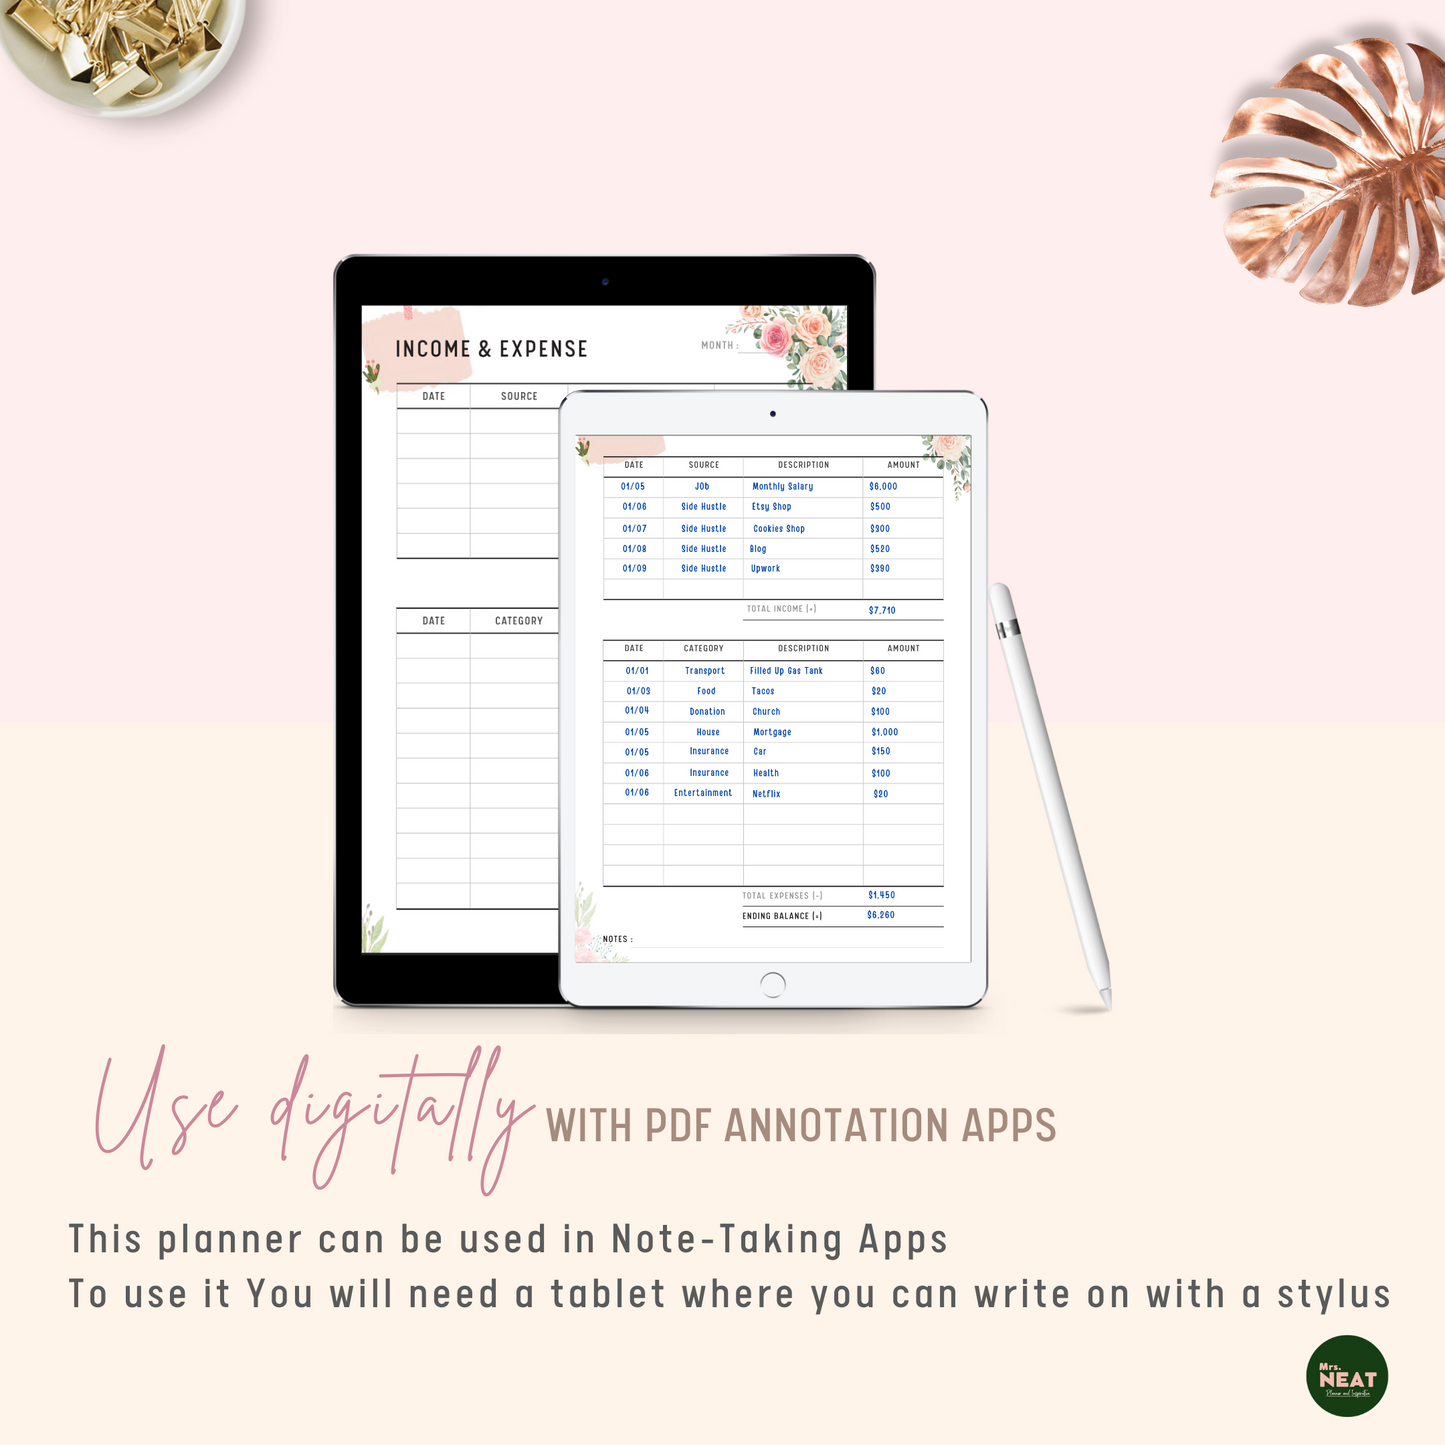 Cute Floral Income and Expense Tracker Planner used digitally with Tablet and Stylus